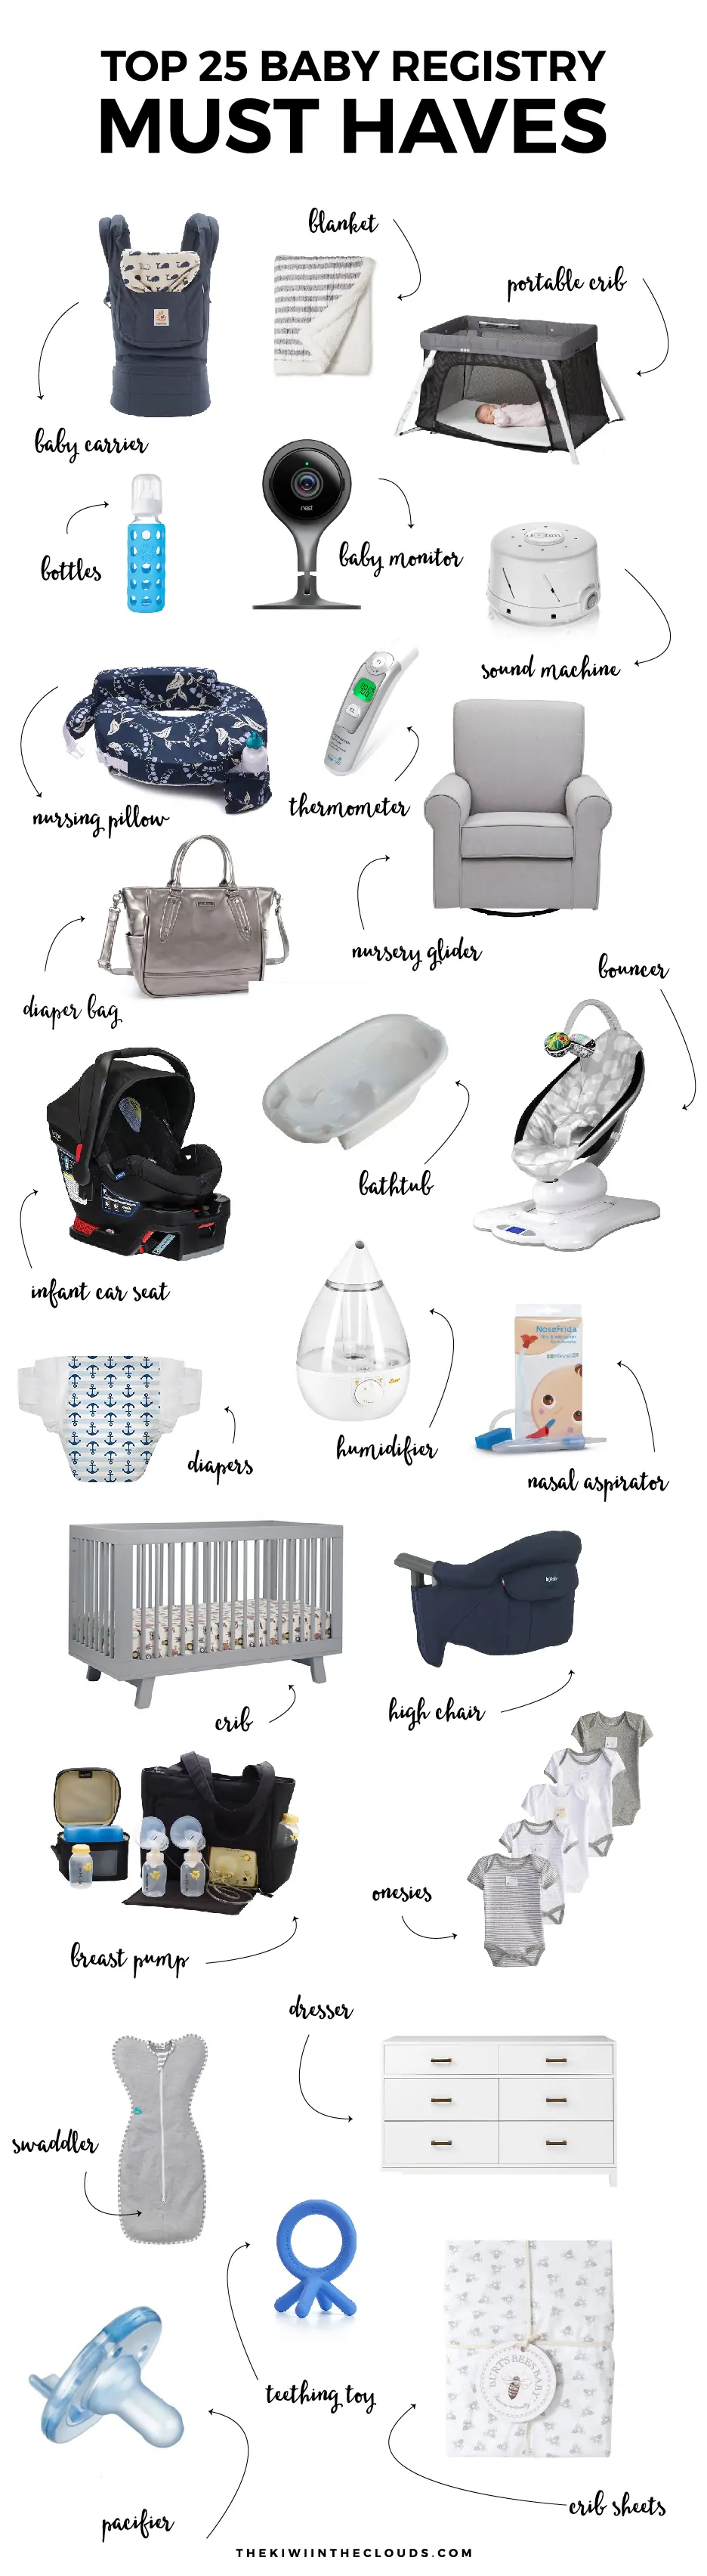 Top 25 Baby Registry Must Haves | Creating the perfect registry can be overwhelming, time consuming and costly. Skip the mistakes of a first time mom and discover what baby items you actually need!